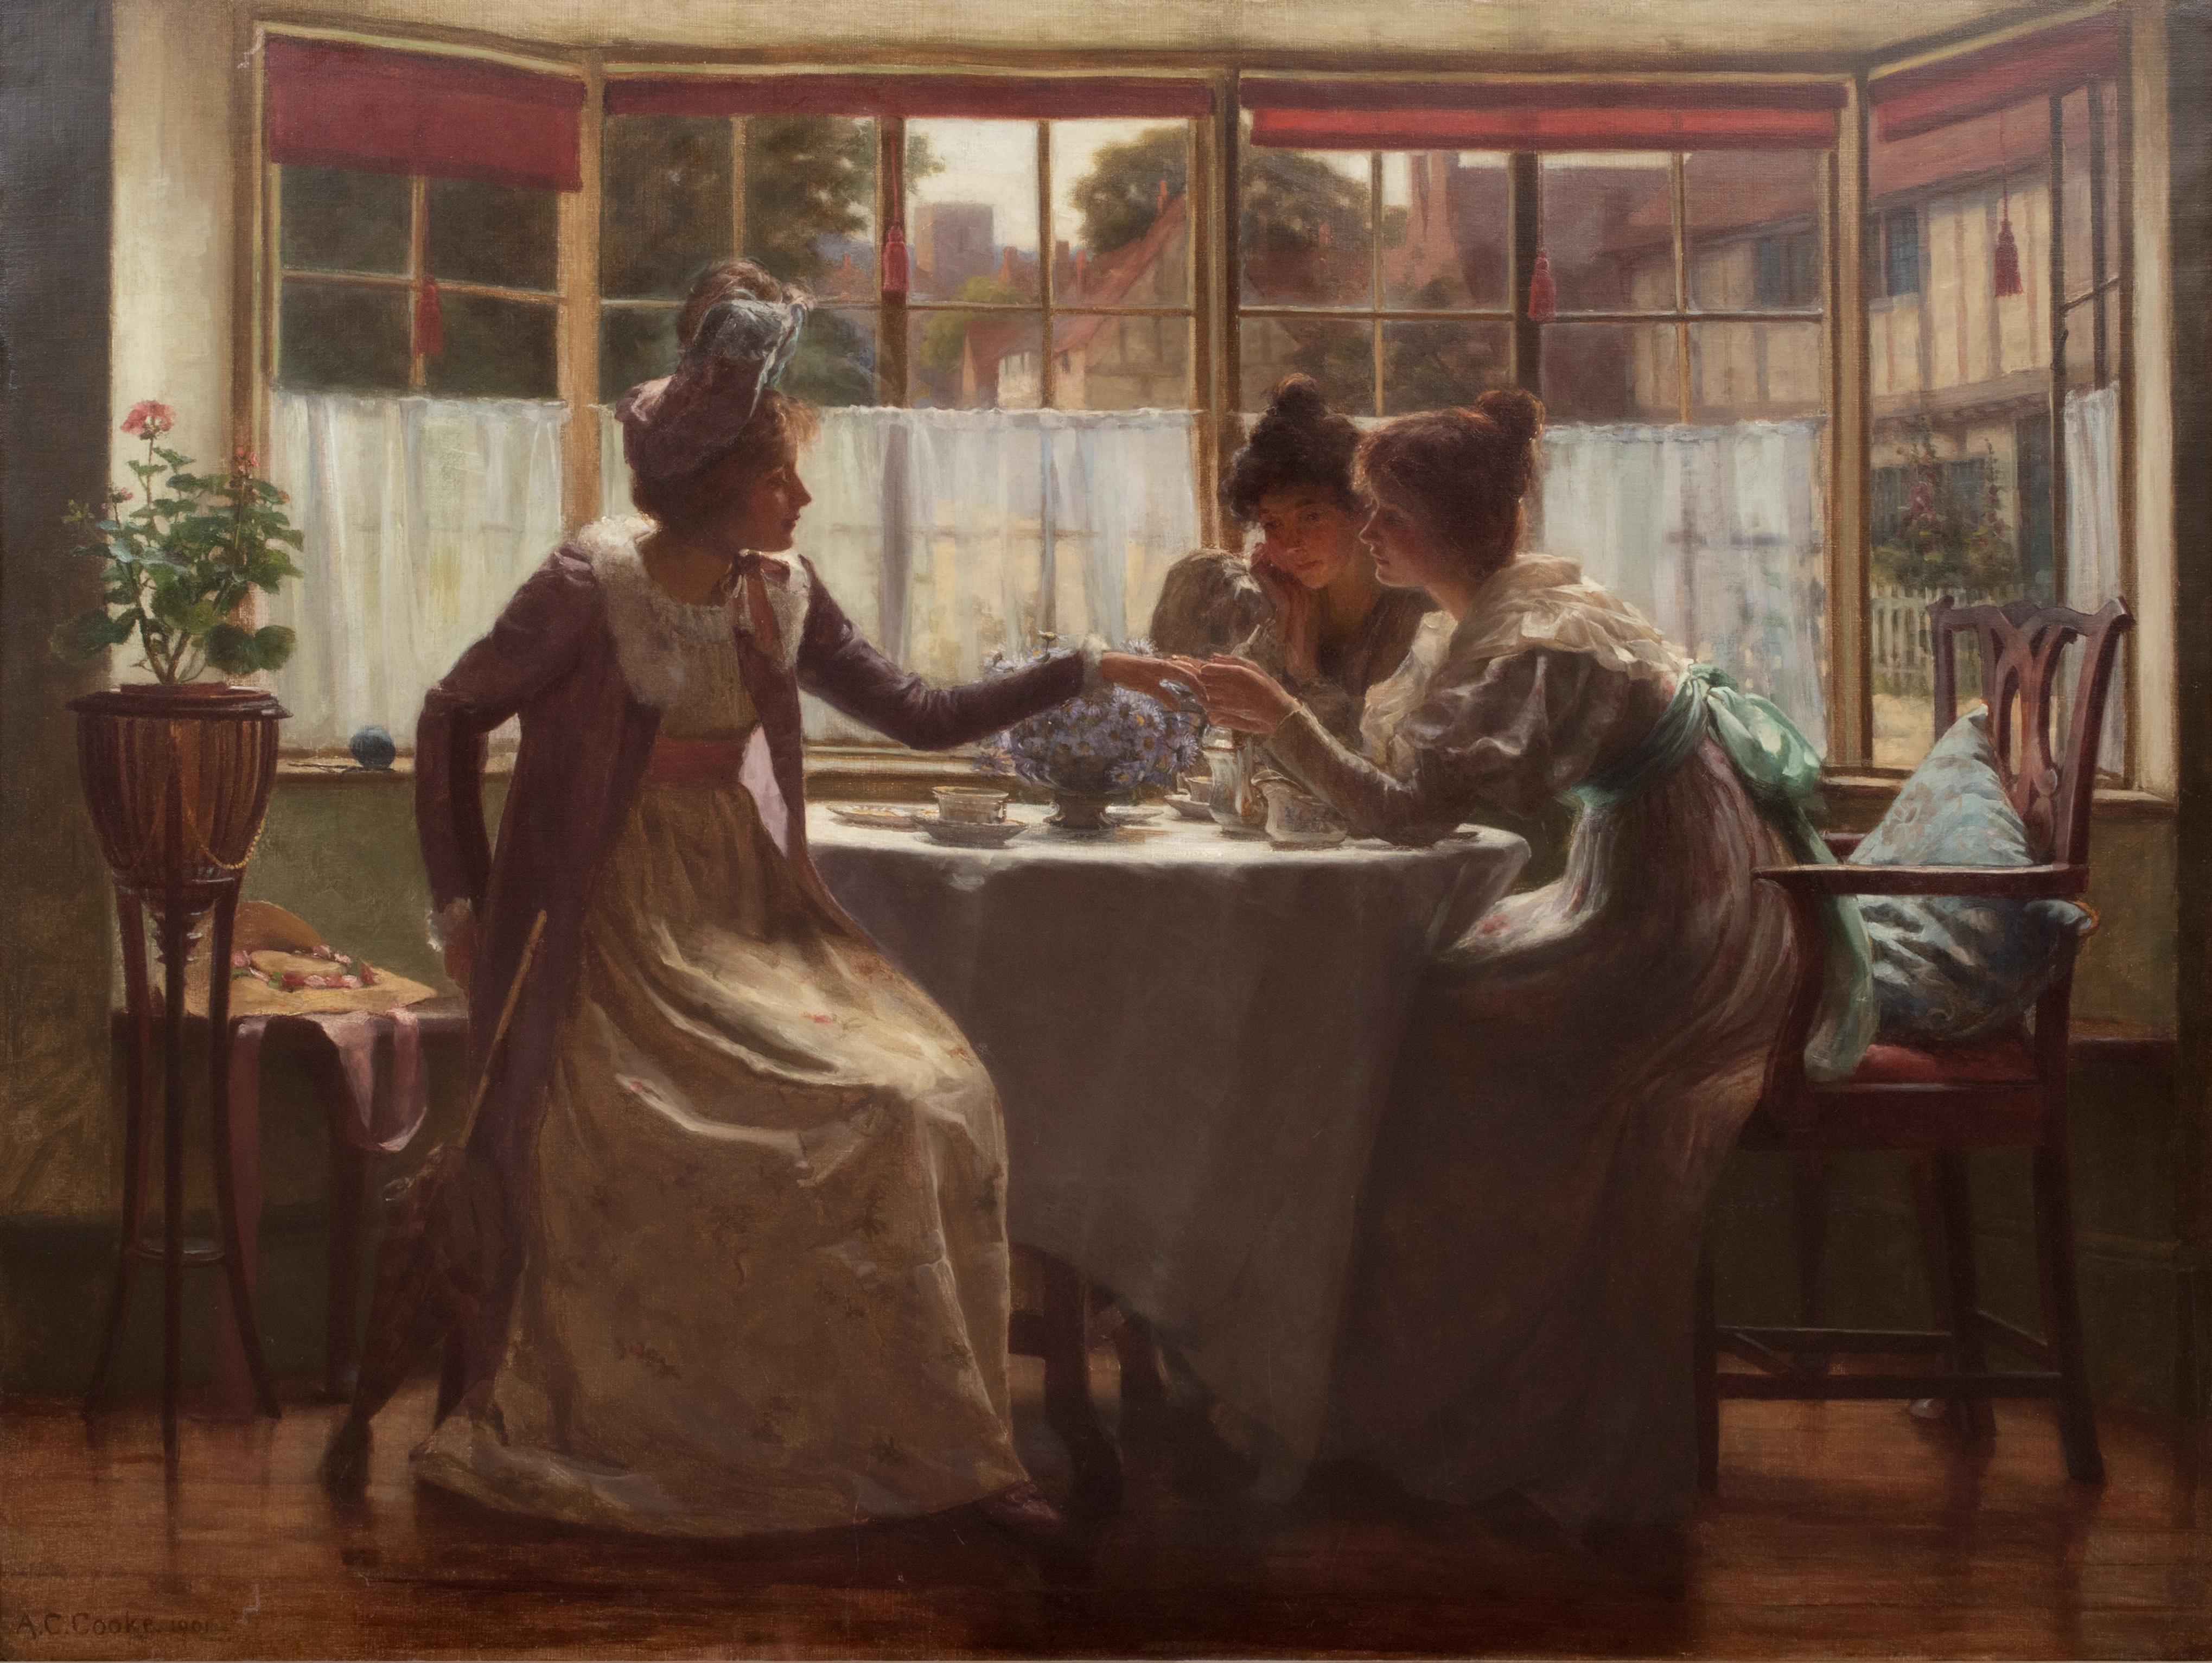 The Engagement Ring, 19th Century 

by Arthur Claude Cooke (1867-1951)

Exhibited work at The Royal Academy, 1901

Large 19th Century interior scene 